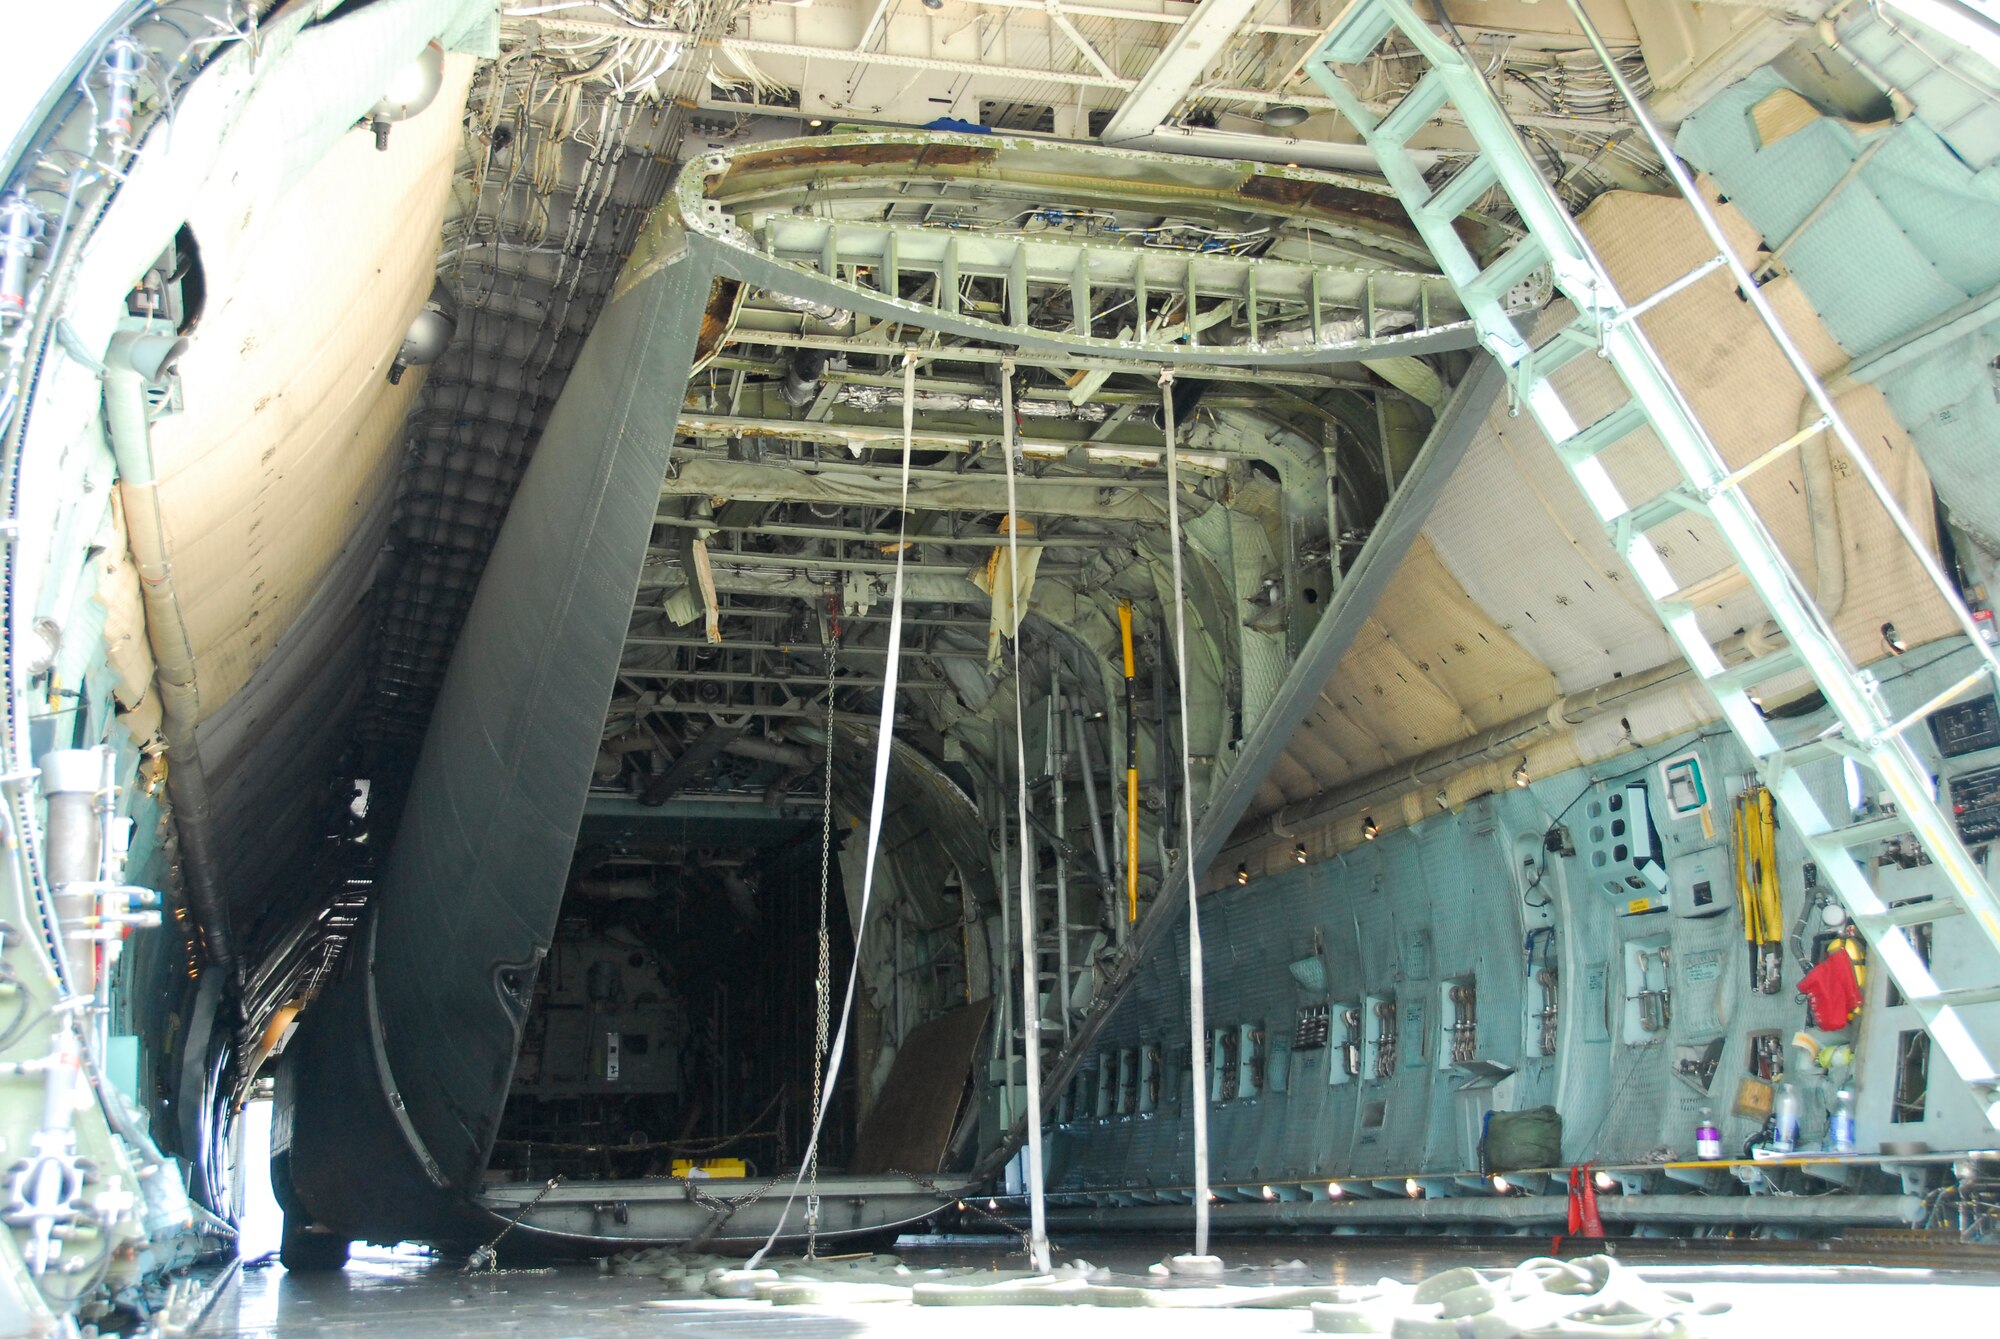 STRATTON AIR NATIONAL GUARD BASE, N.Y. -- Guardsmen spent more than two years planning the details of getting the C-130 fuselage transported via C-5 to the base here. 